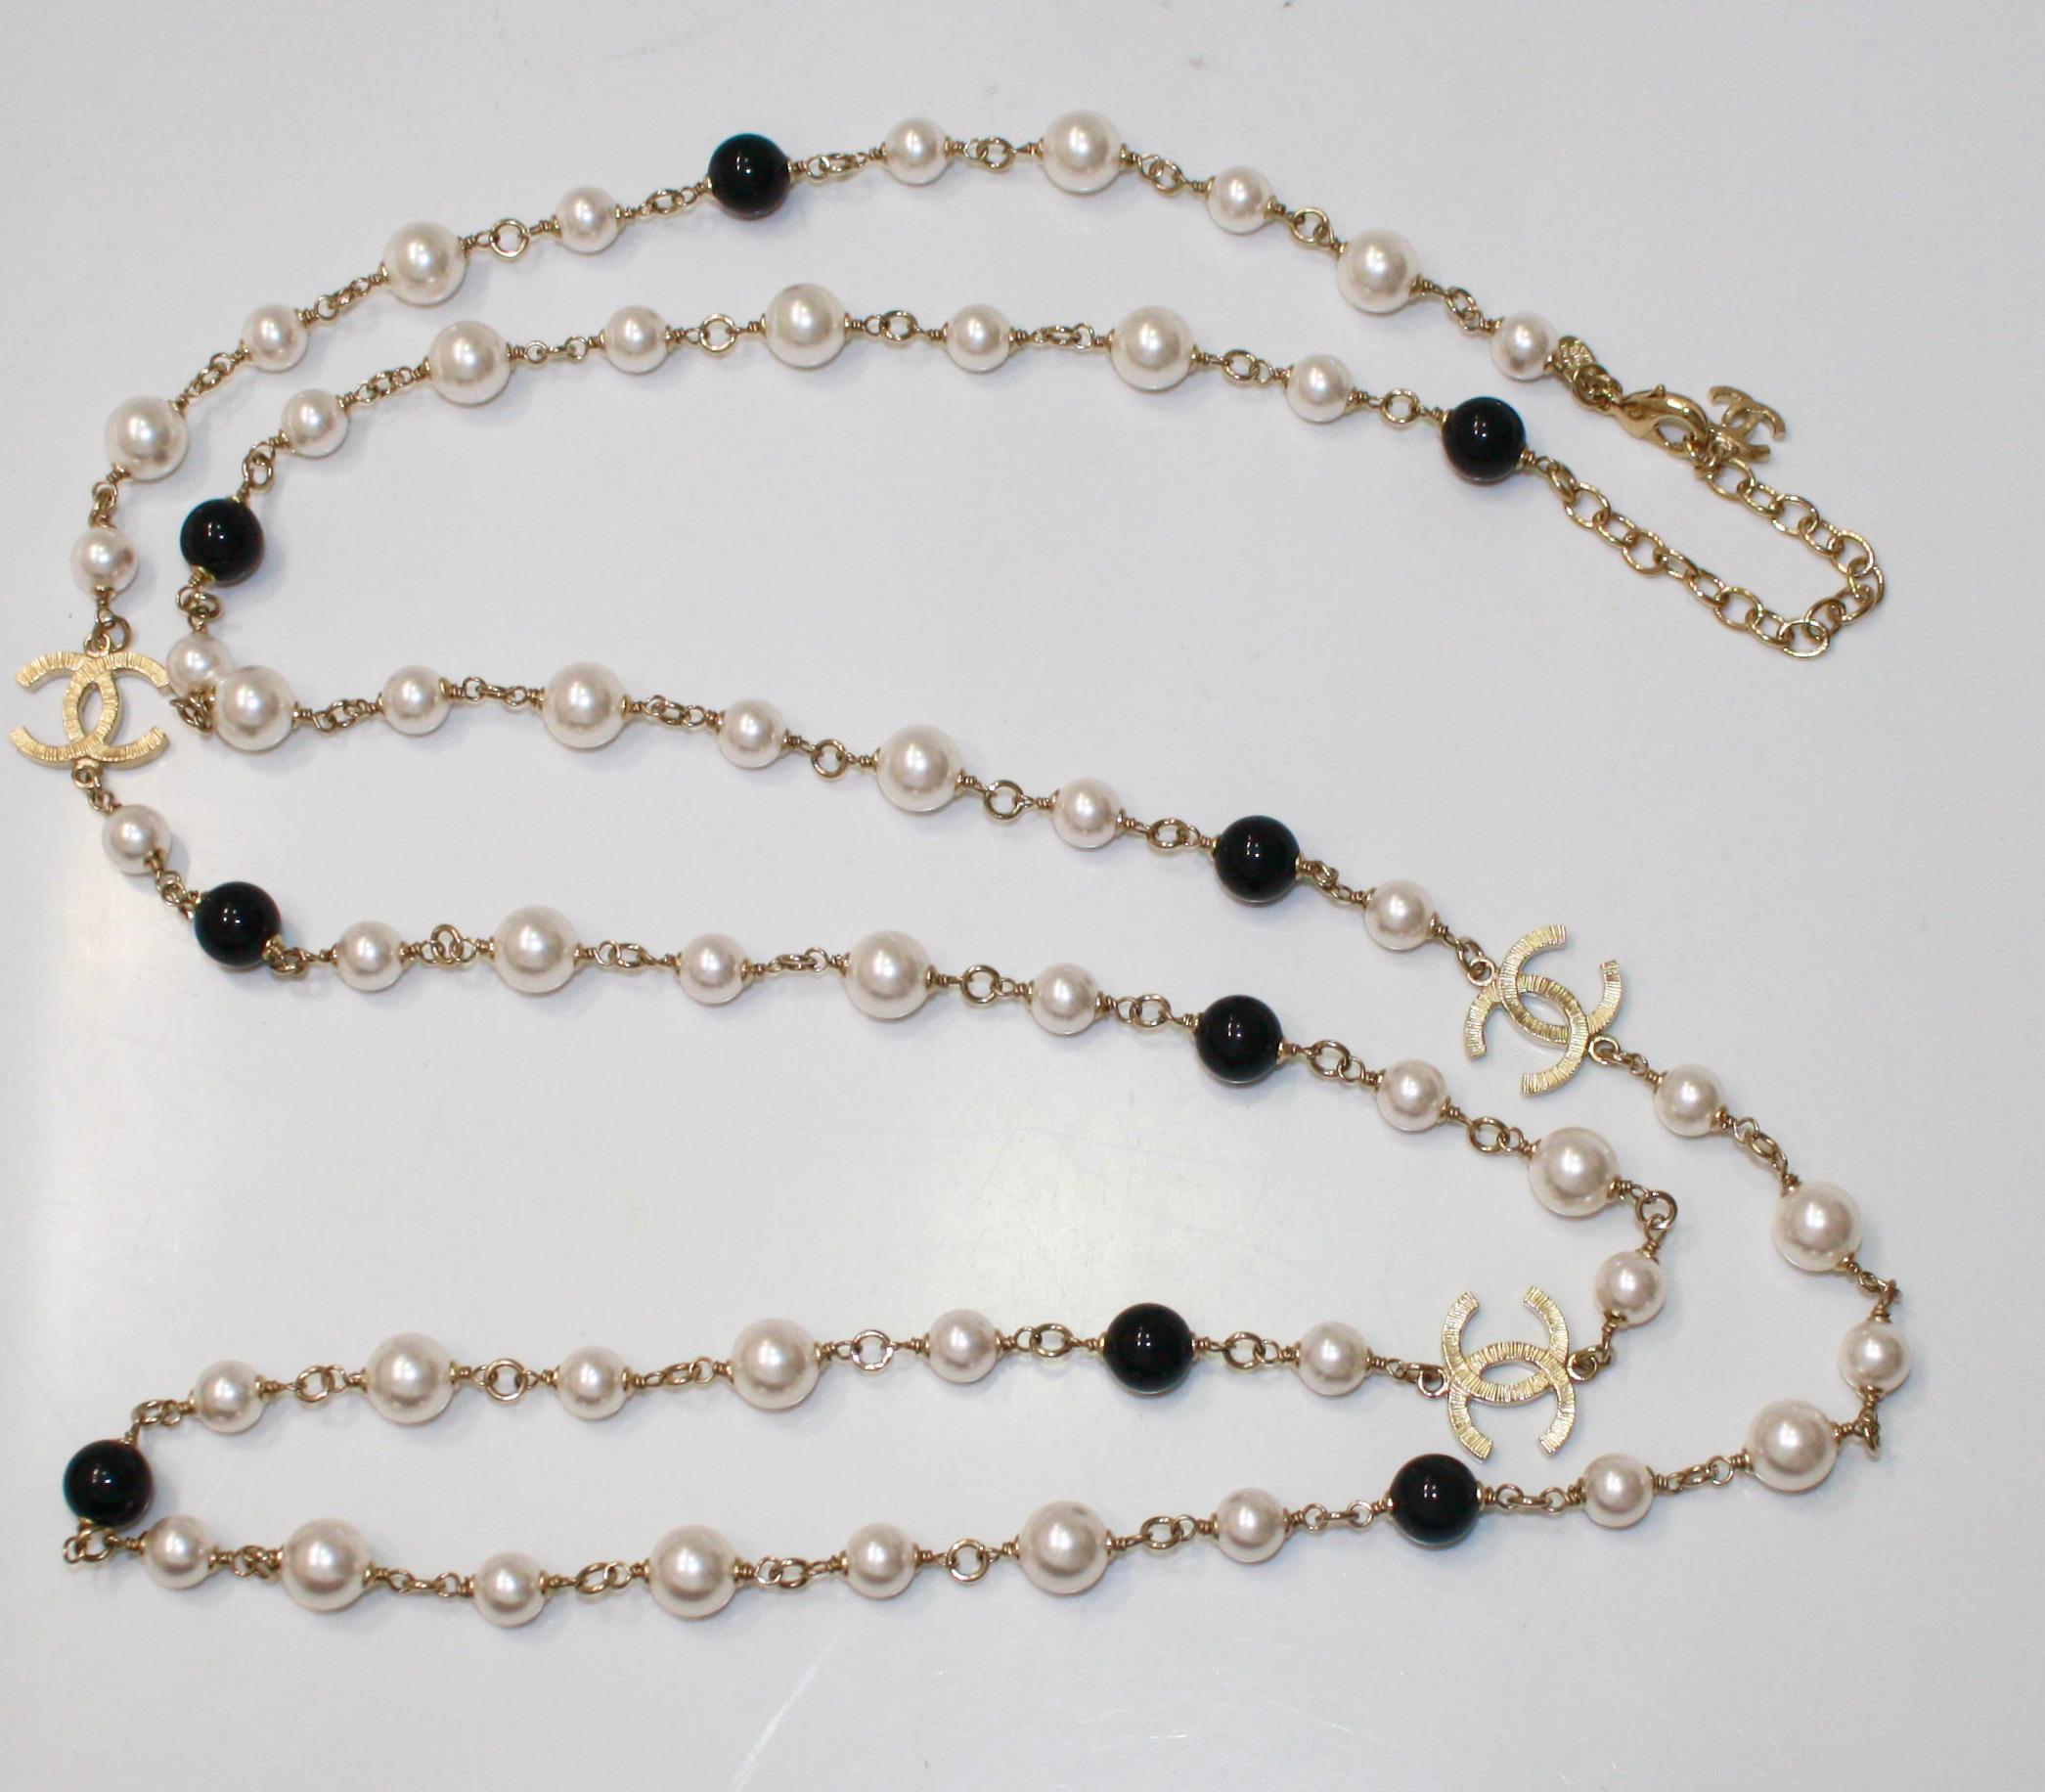 Black and white glass pearls on pale gold metal with 3 CC motifs . From the 2007 fall collection. Signature by the clasp